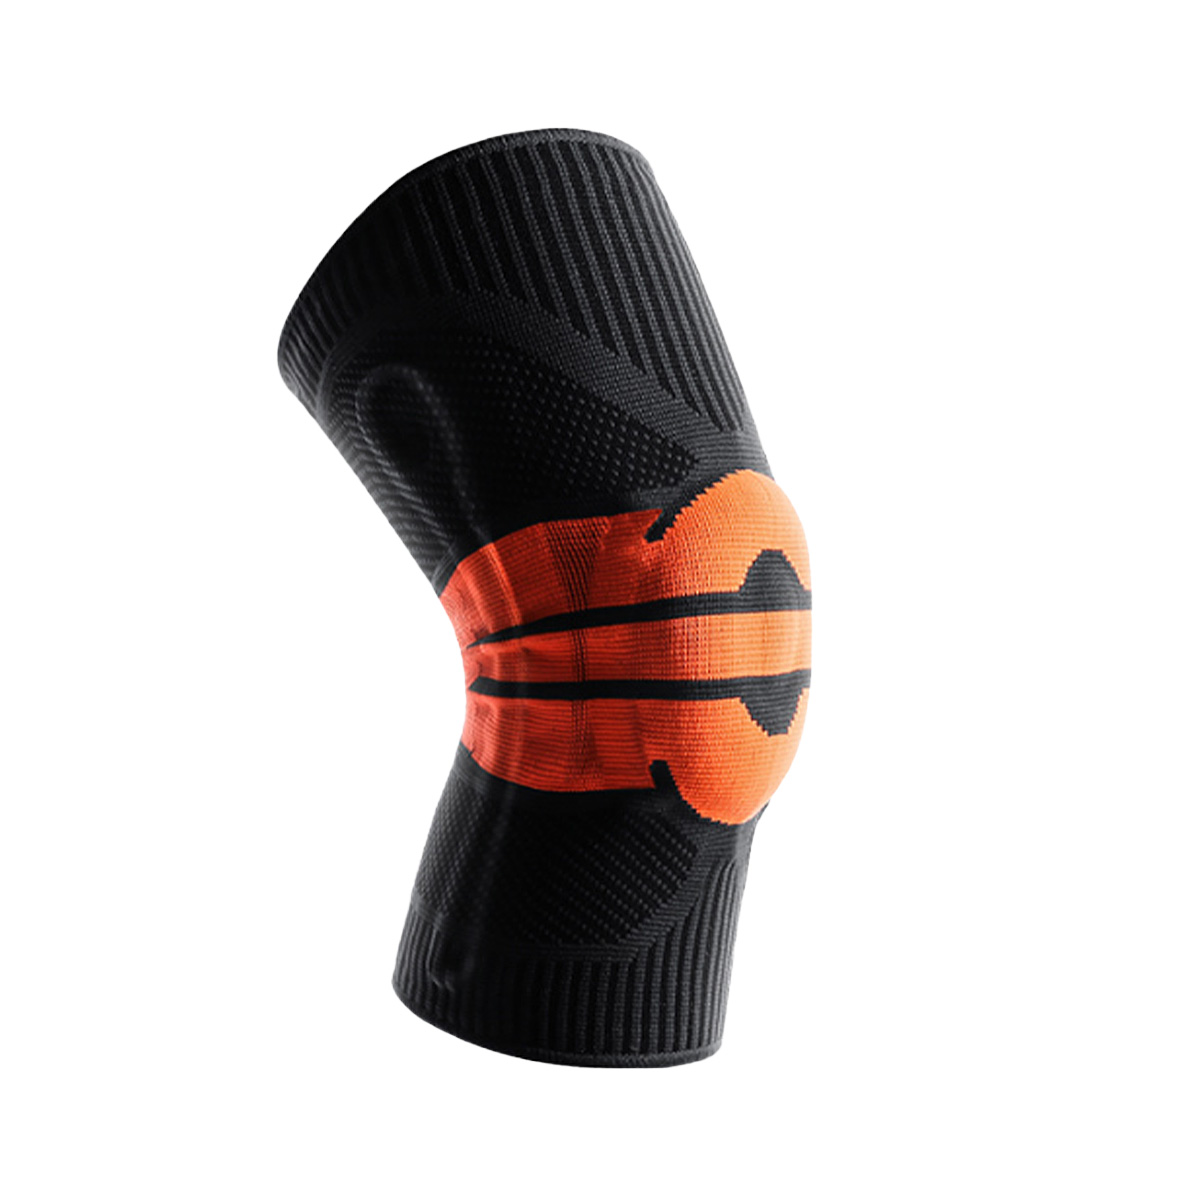 Soft Compression Protective Knee Support Sleeve Mei silikon